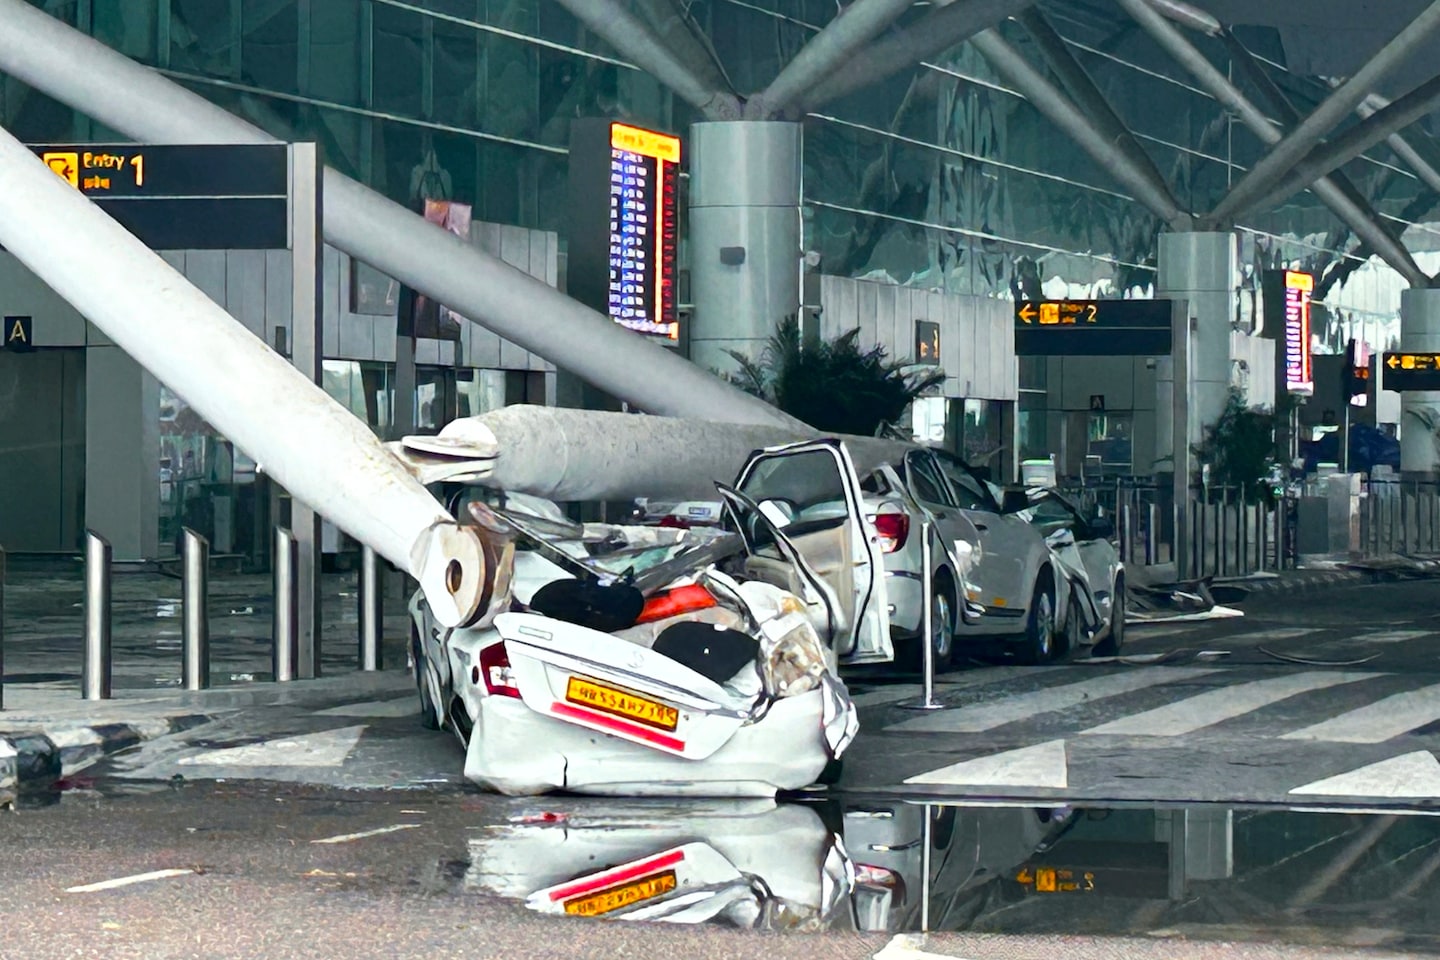 Delhi airport roof collapse from monsoon crushes cars